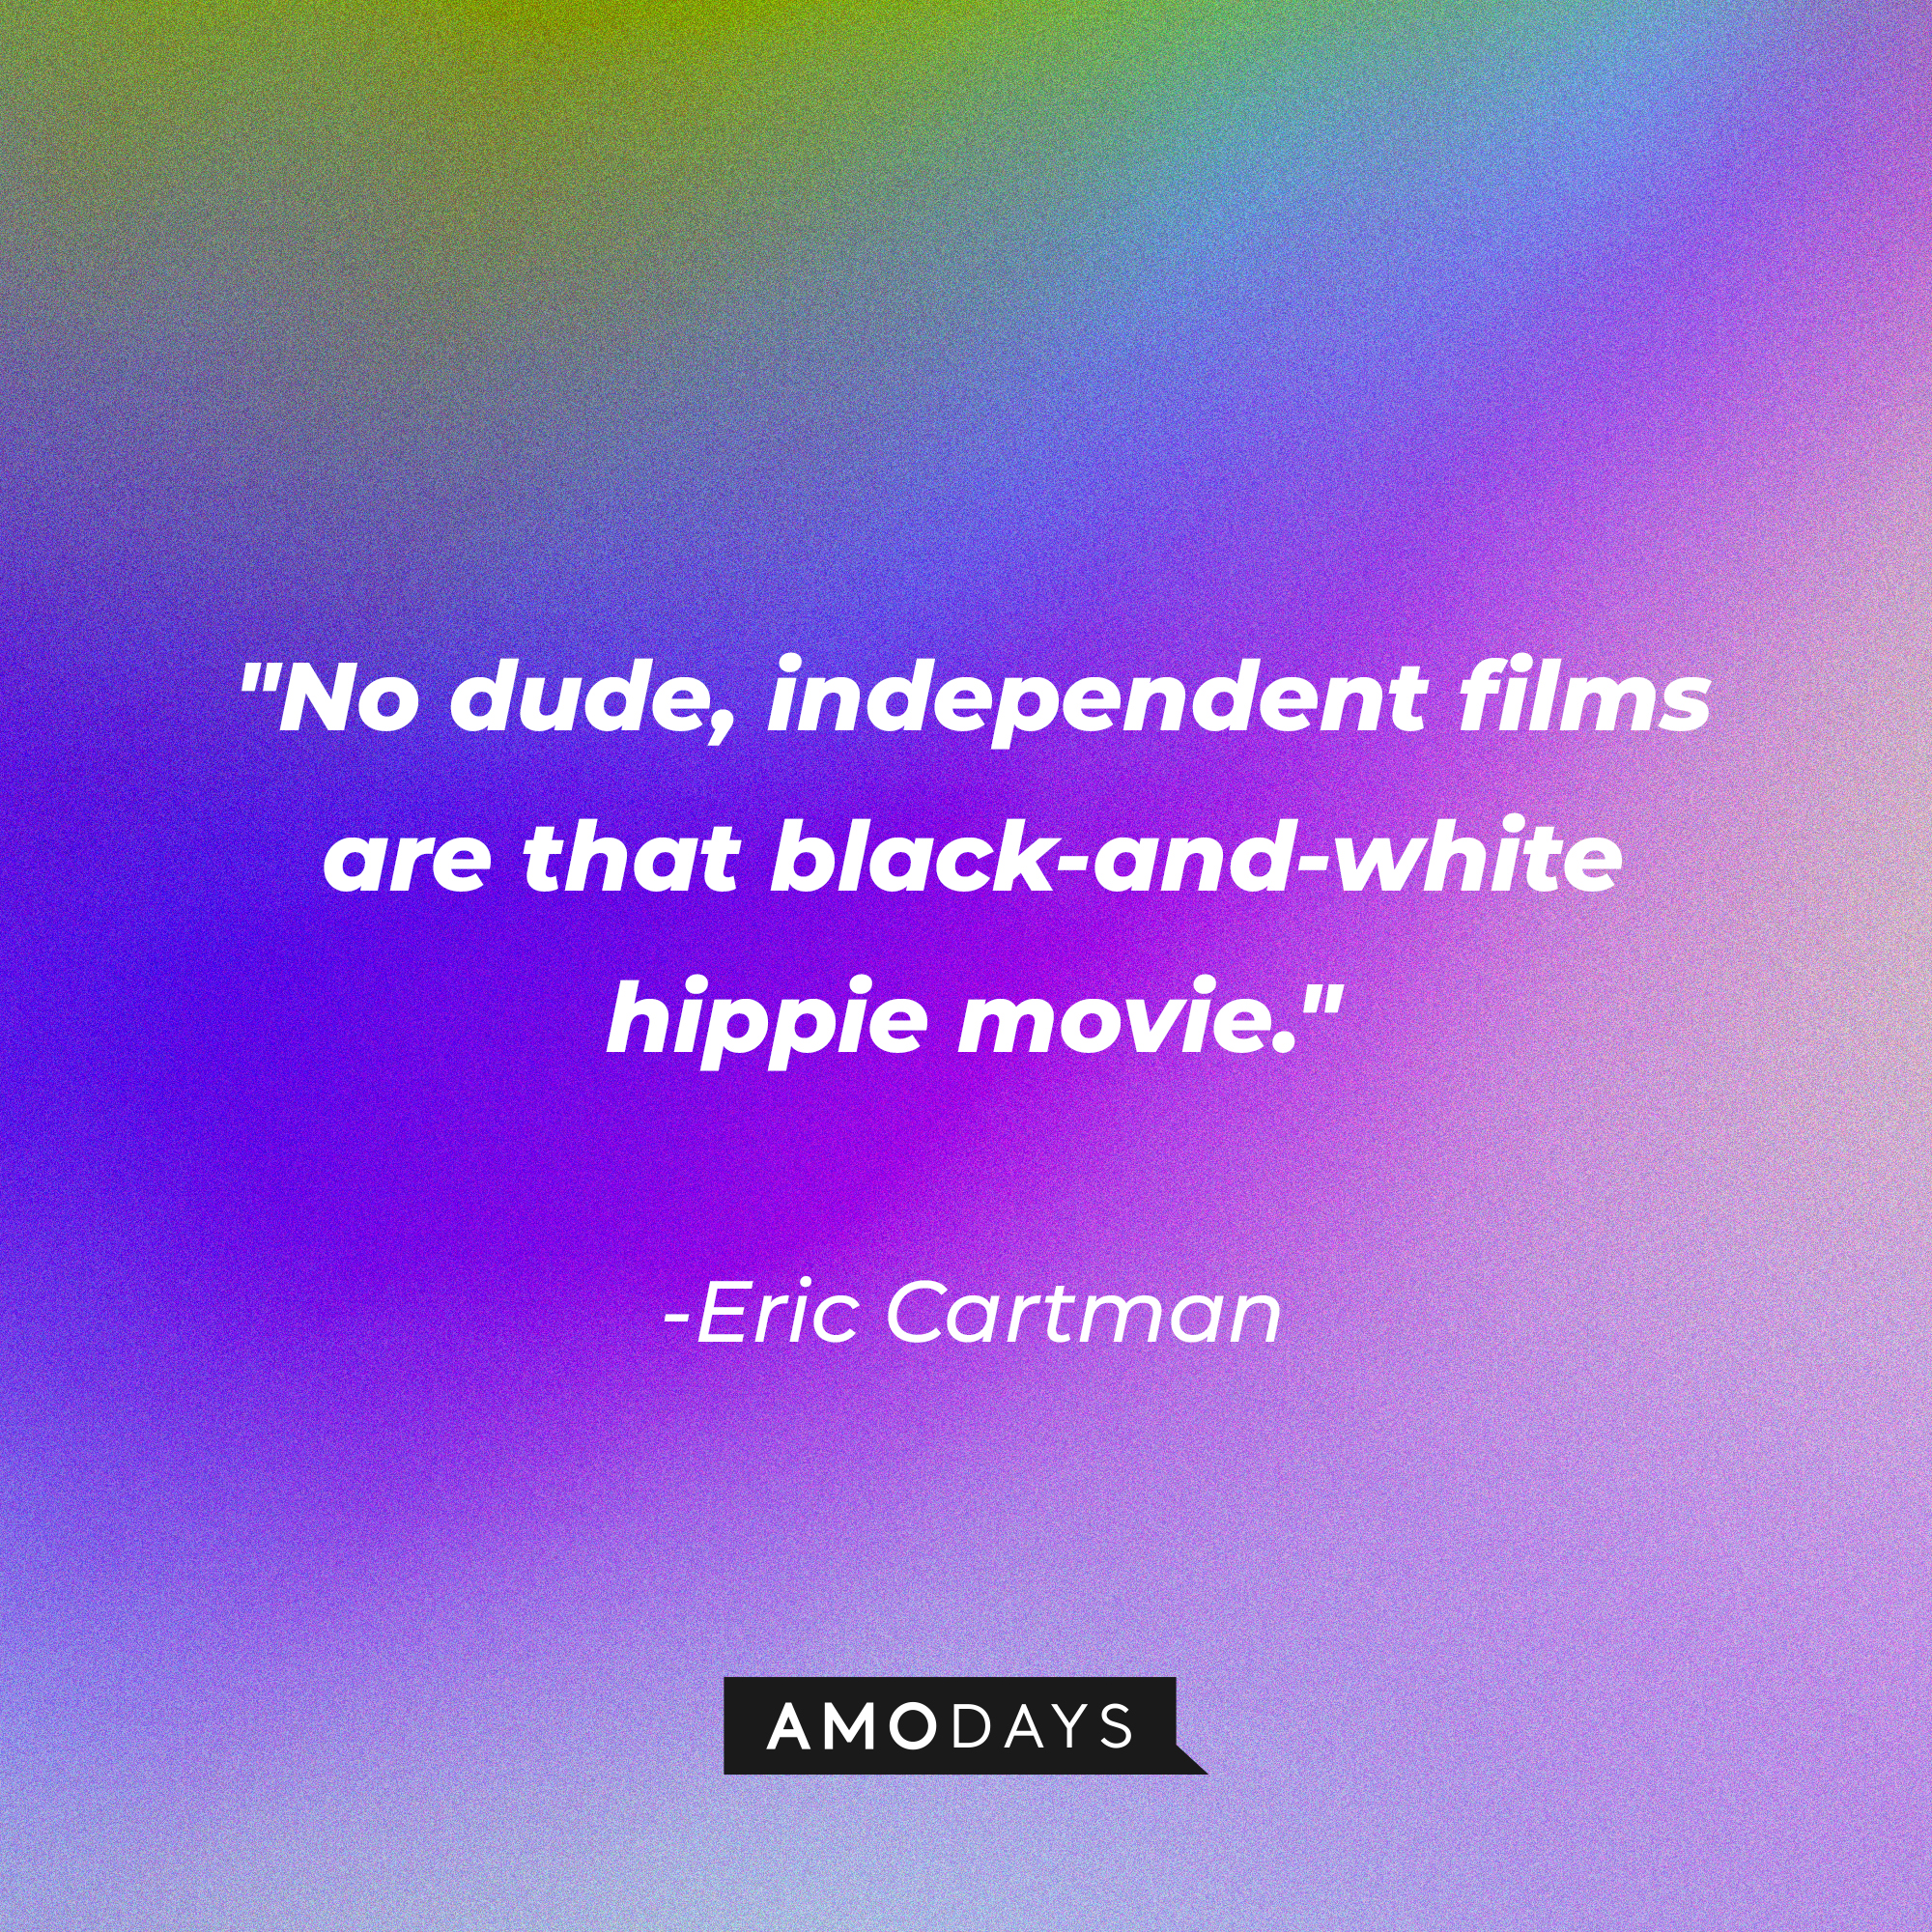 Eric Cartman's quote: "No dude, independent films are that black-and-white hippie movie." | Source: AmoDays